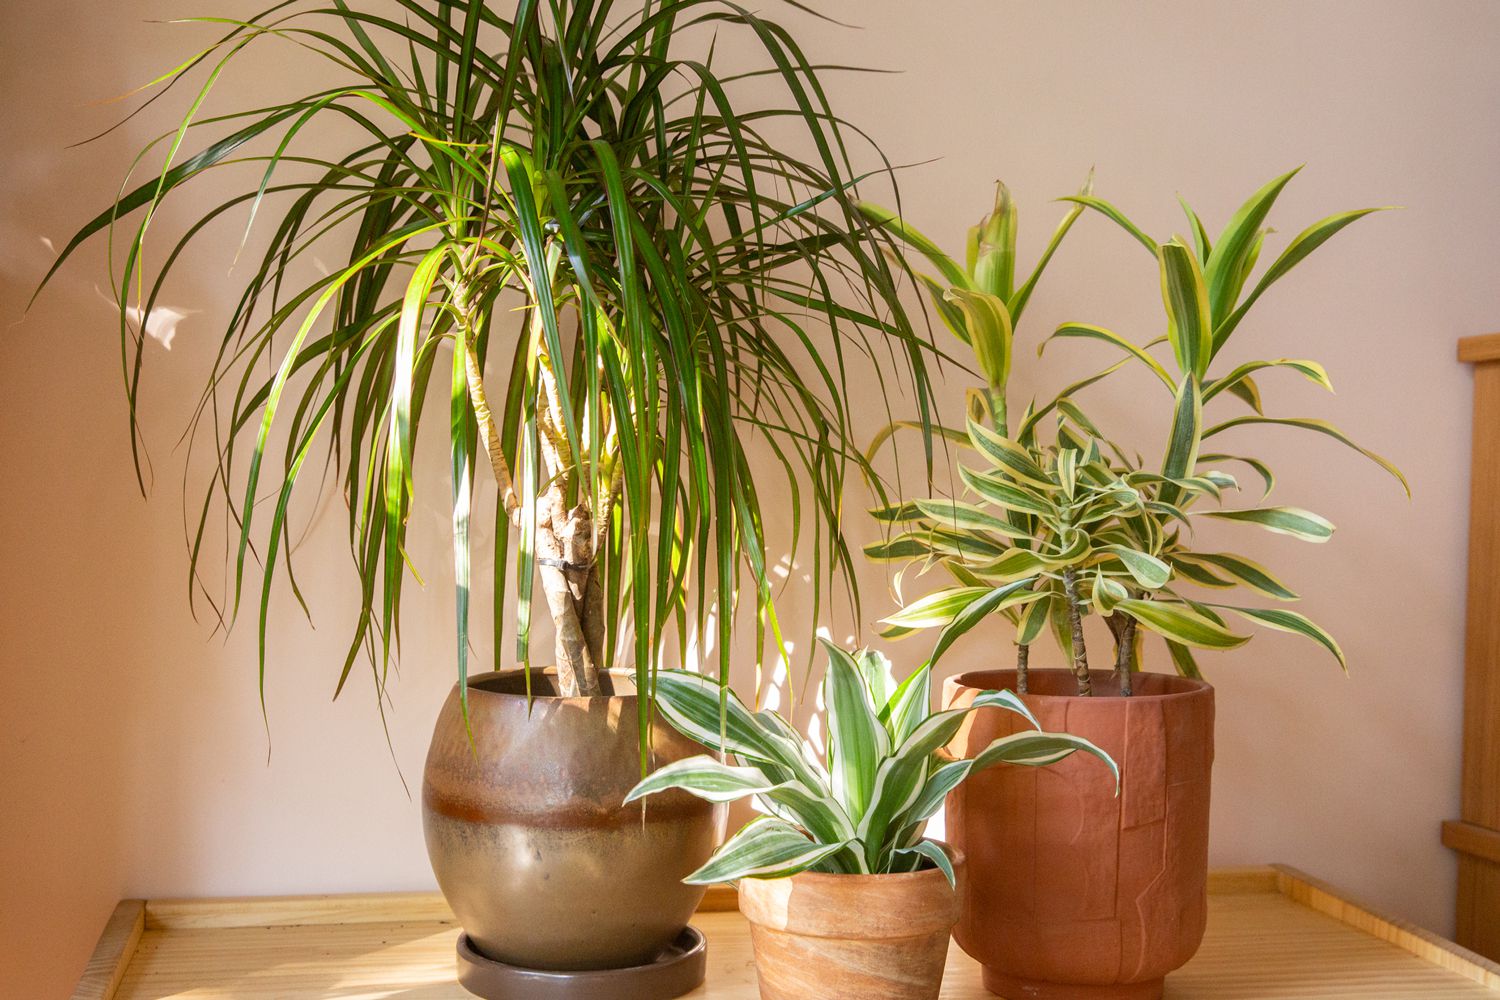 How To Take Care Of A Dracaena Plant